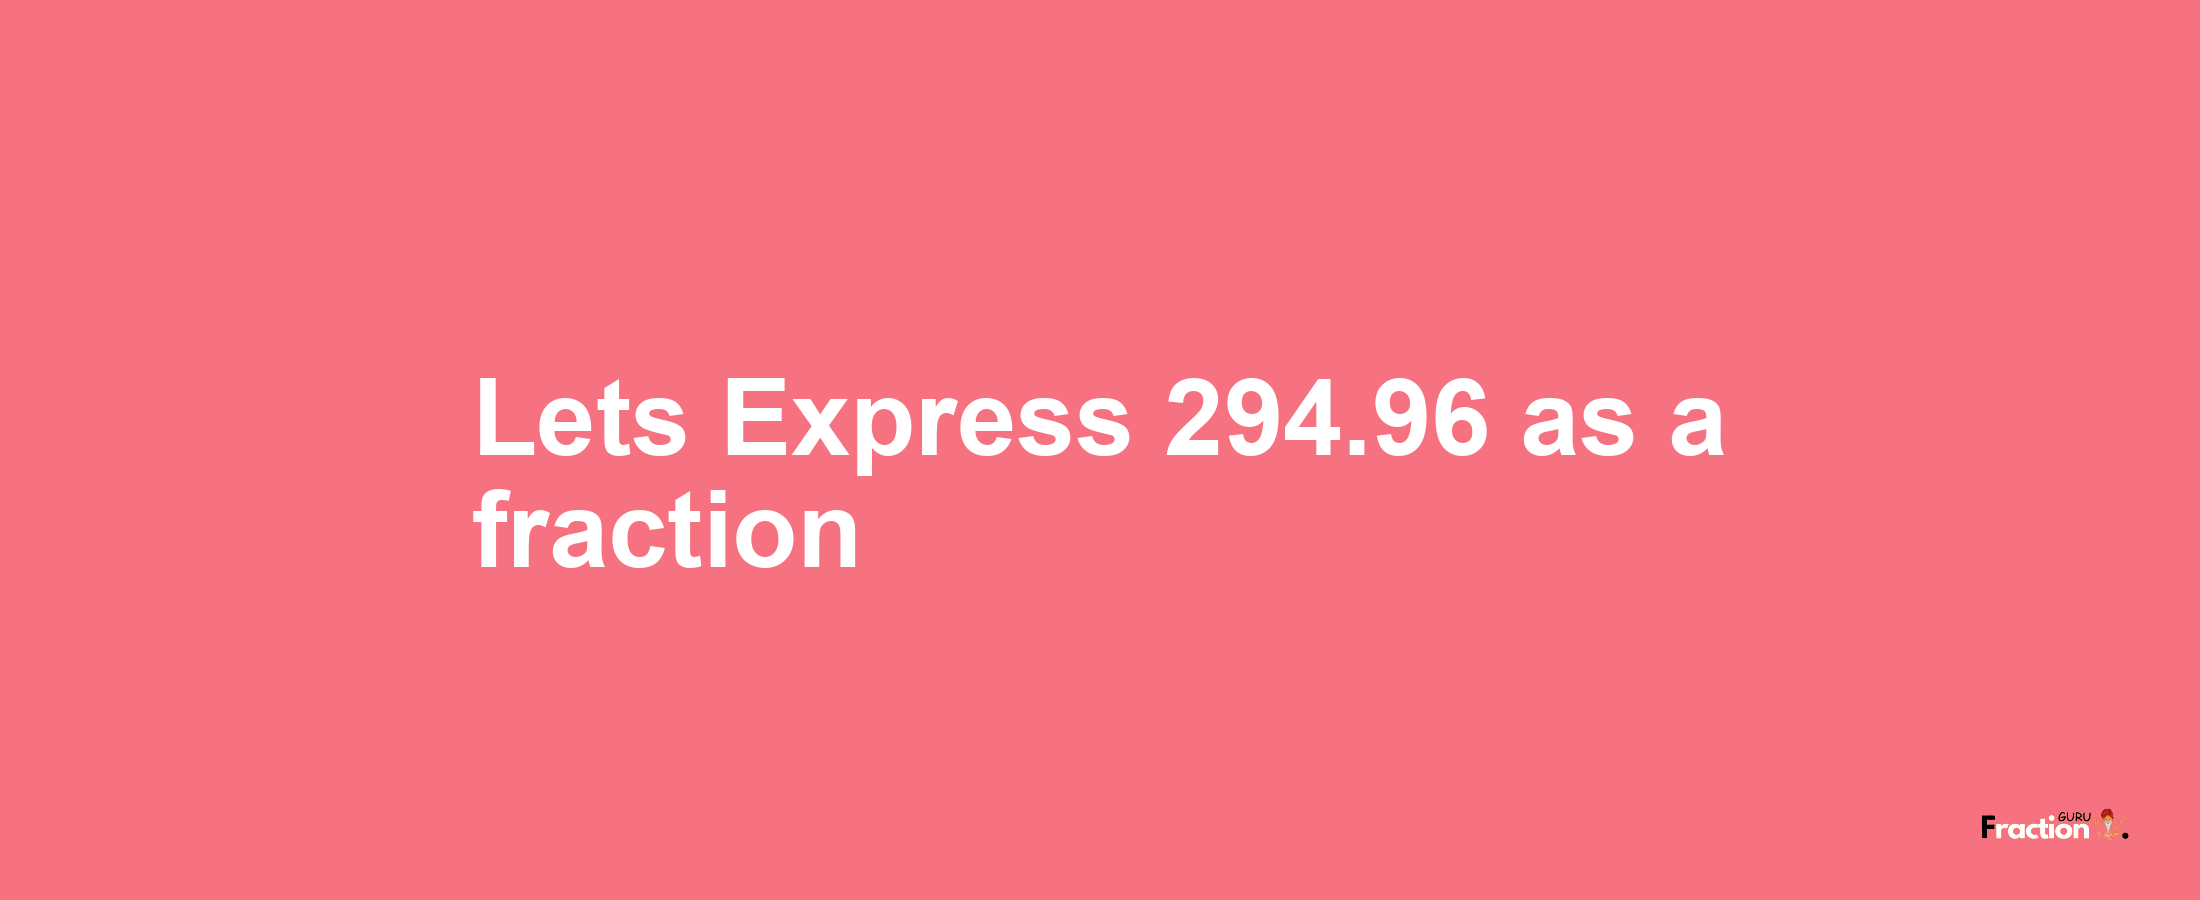 Lets Express 294.96 as afraction